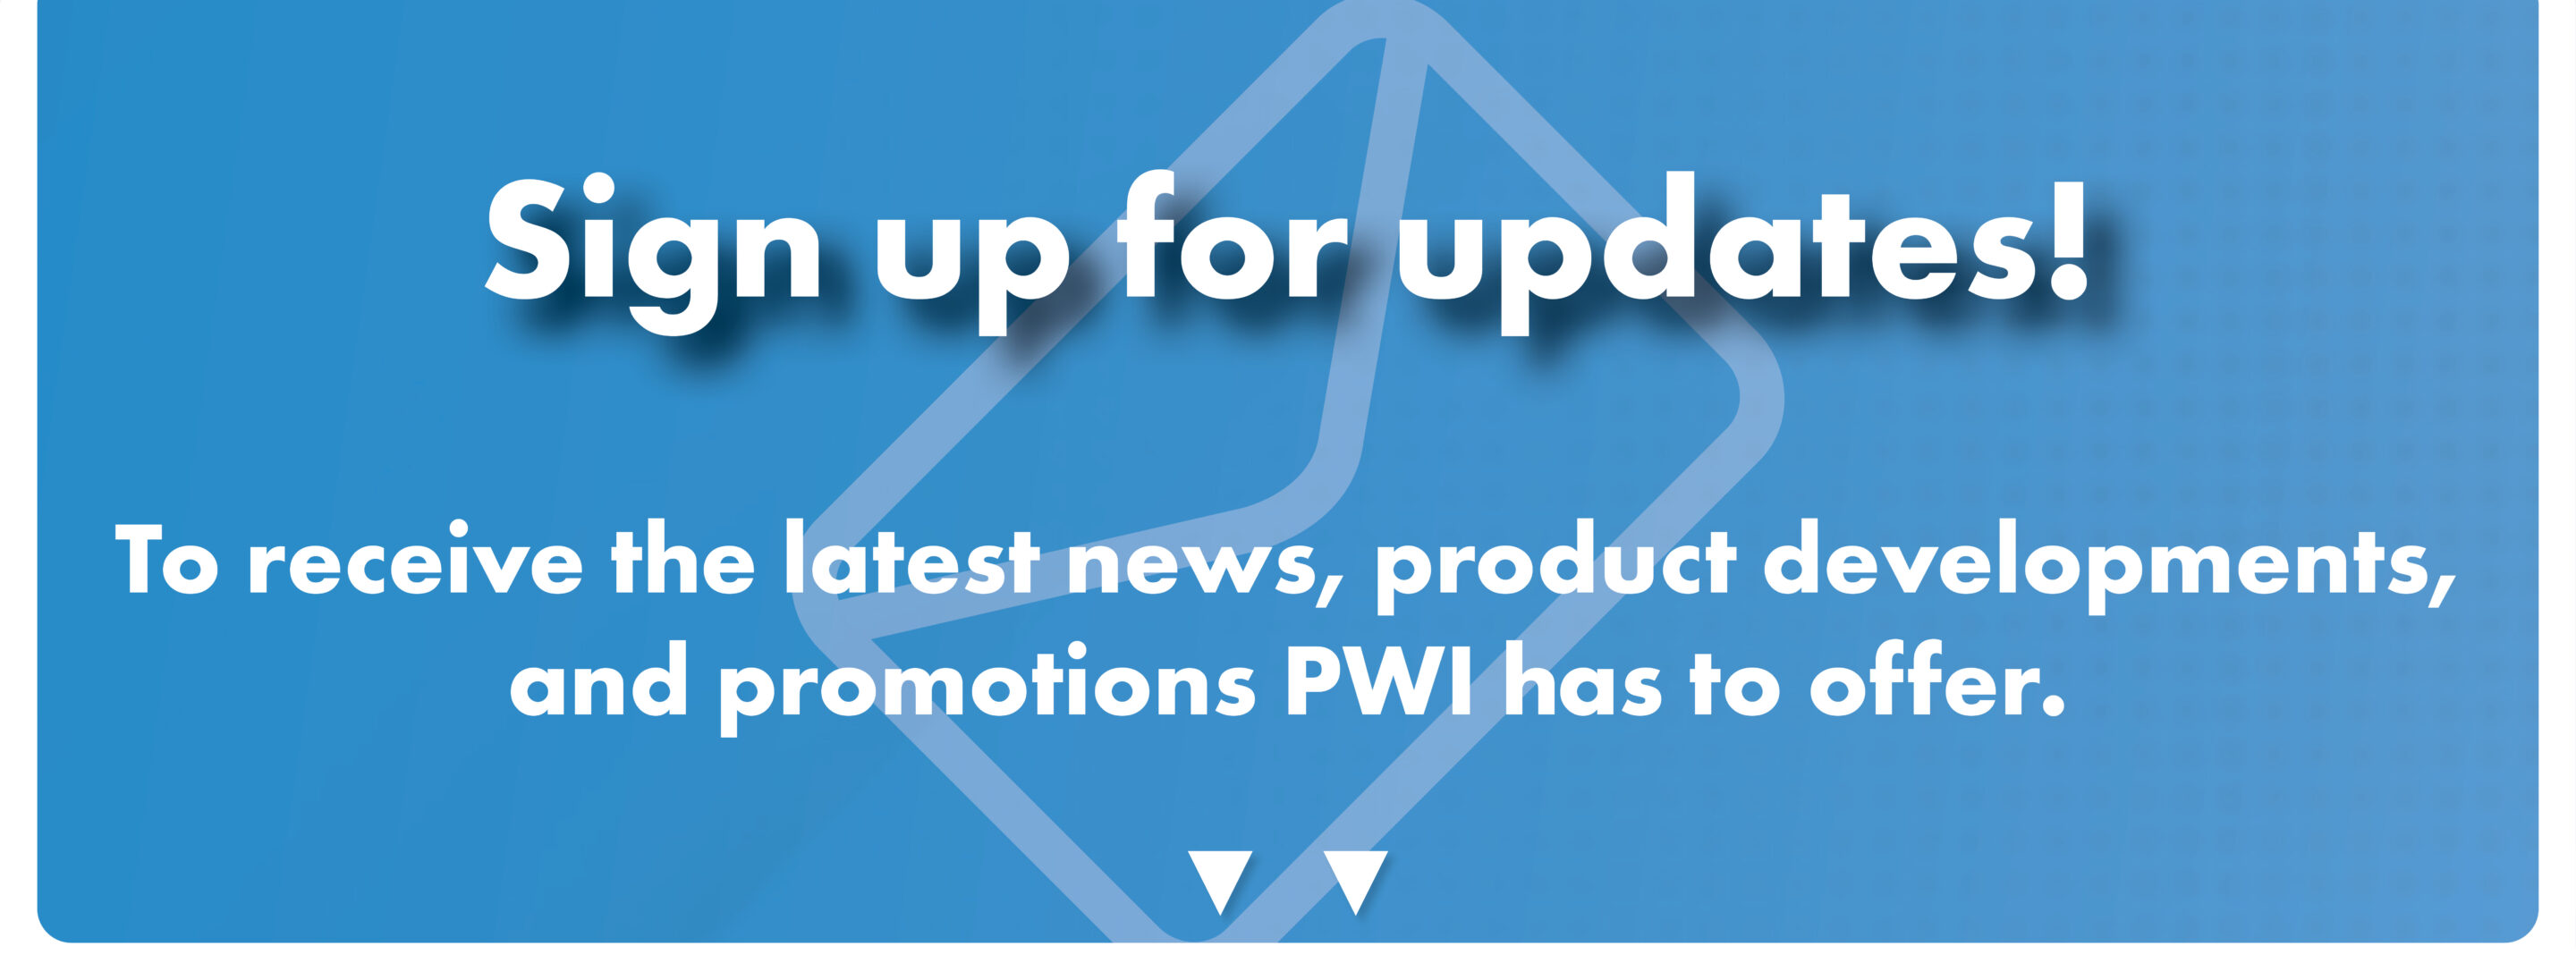 Get product emails updates, announcements and more!